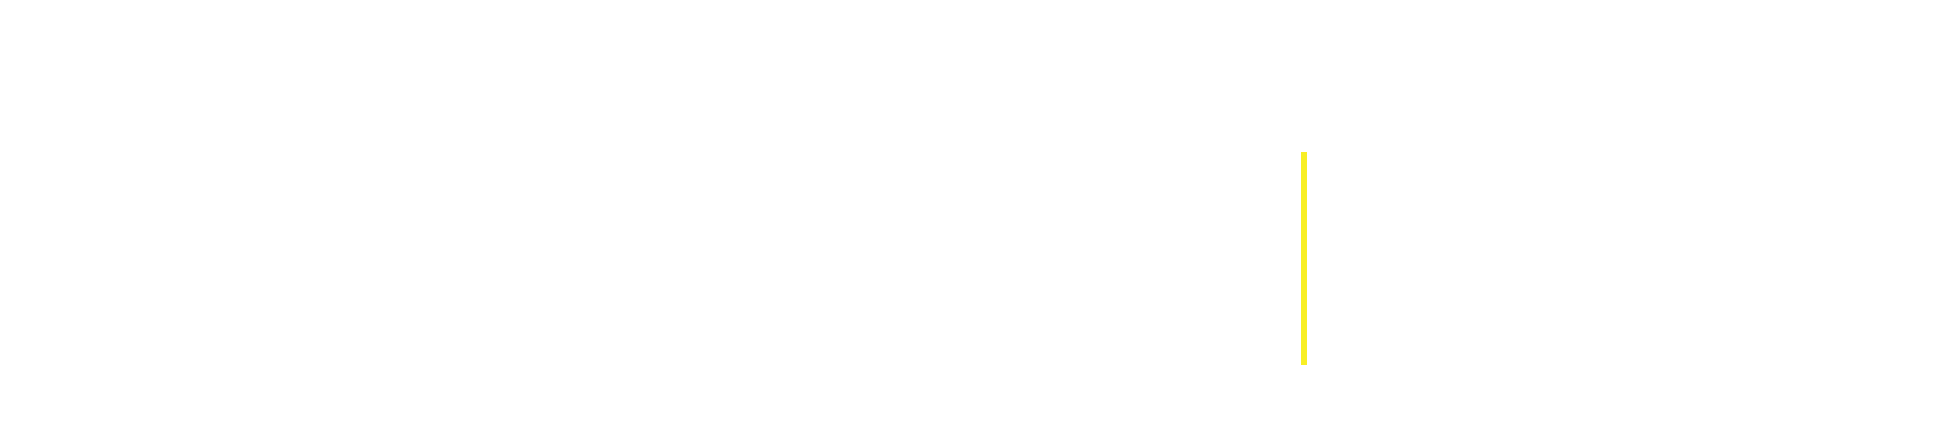 Clarion has rebranded to Lumanity